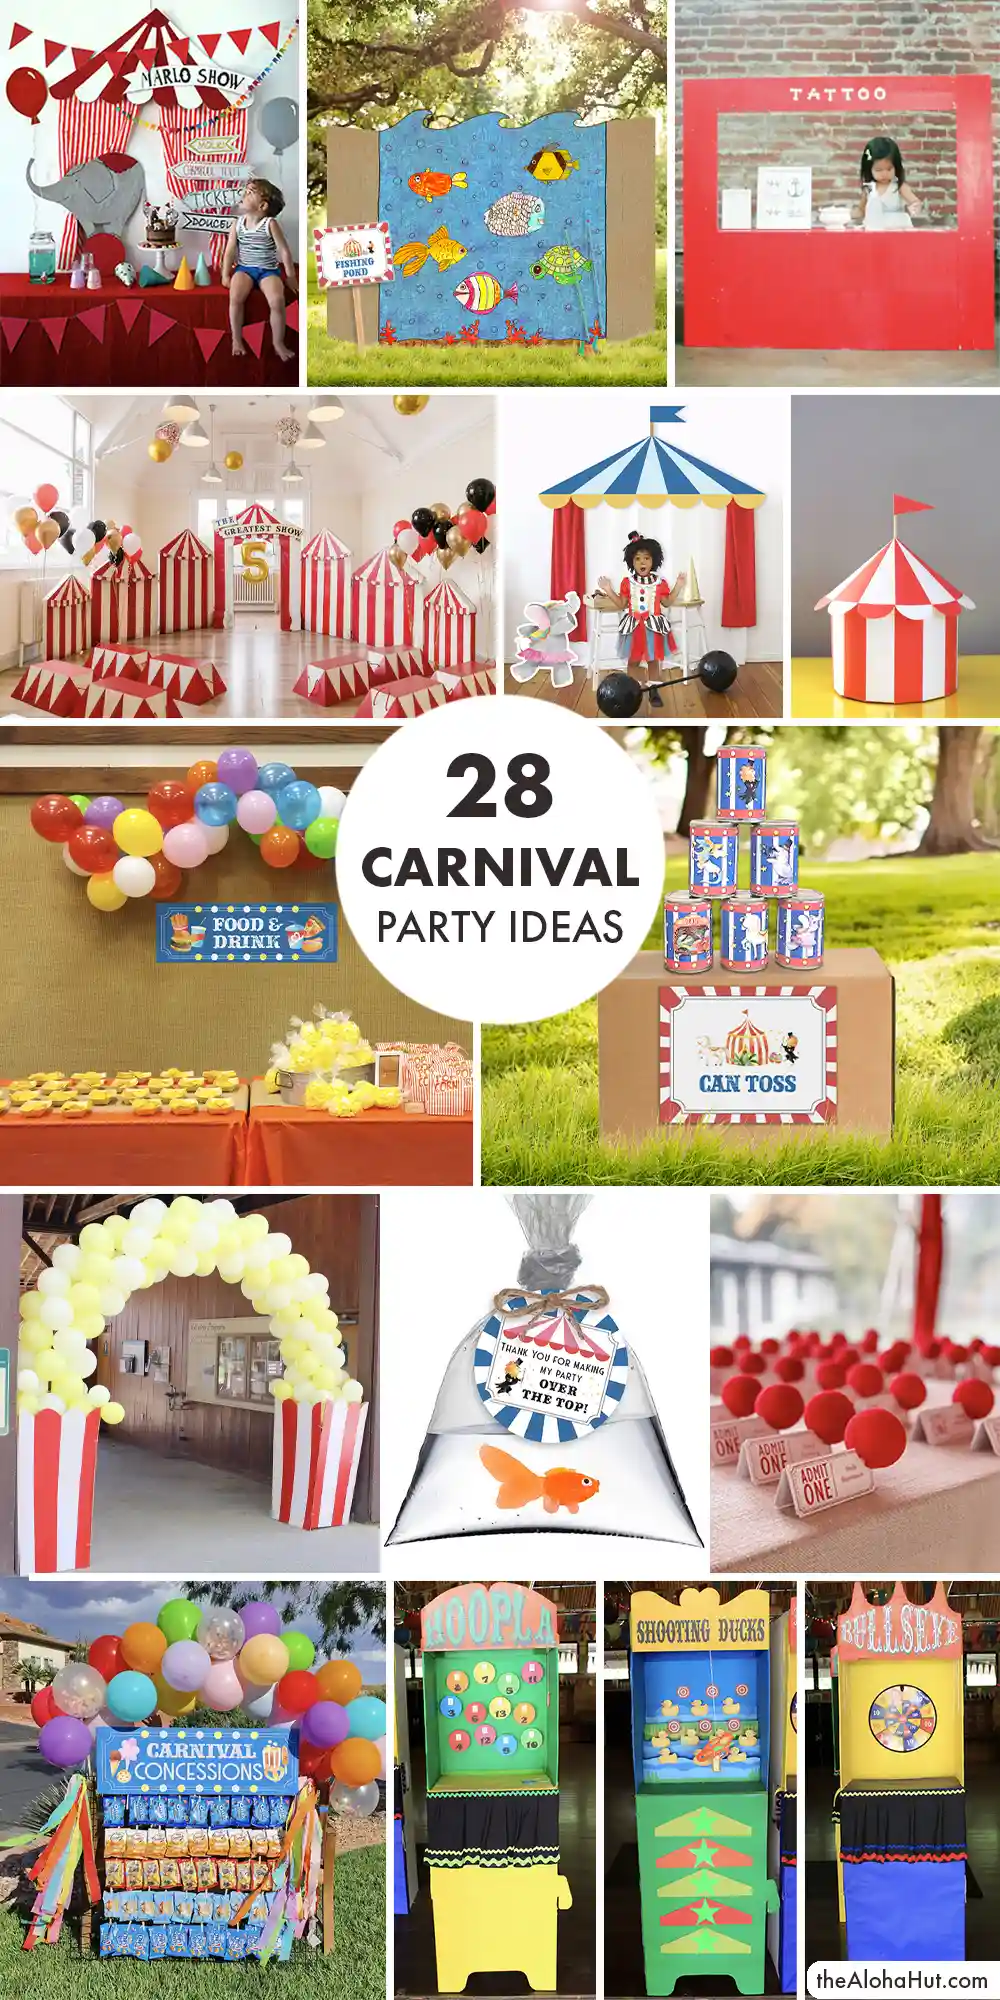 5 Carnival Kids' Costumes Inspired by Circus - Petit & Small